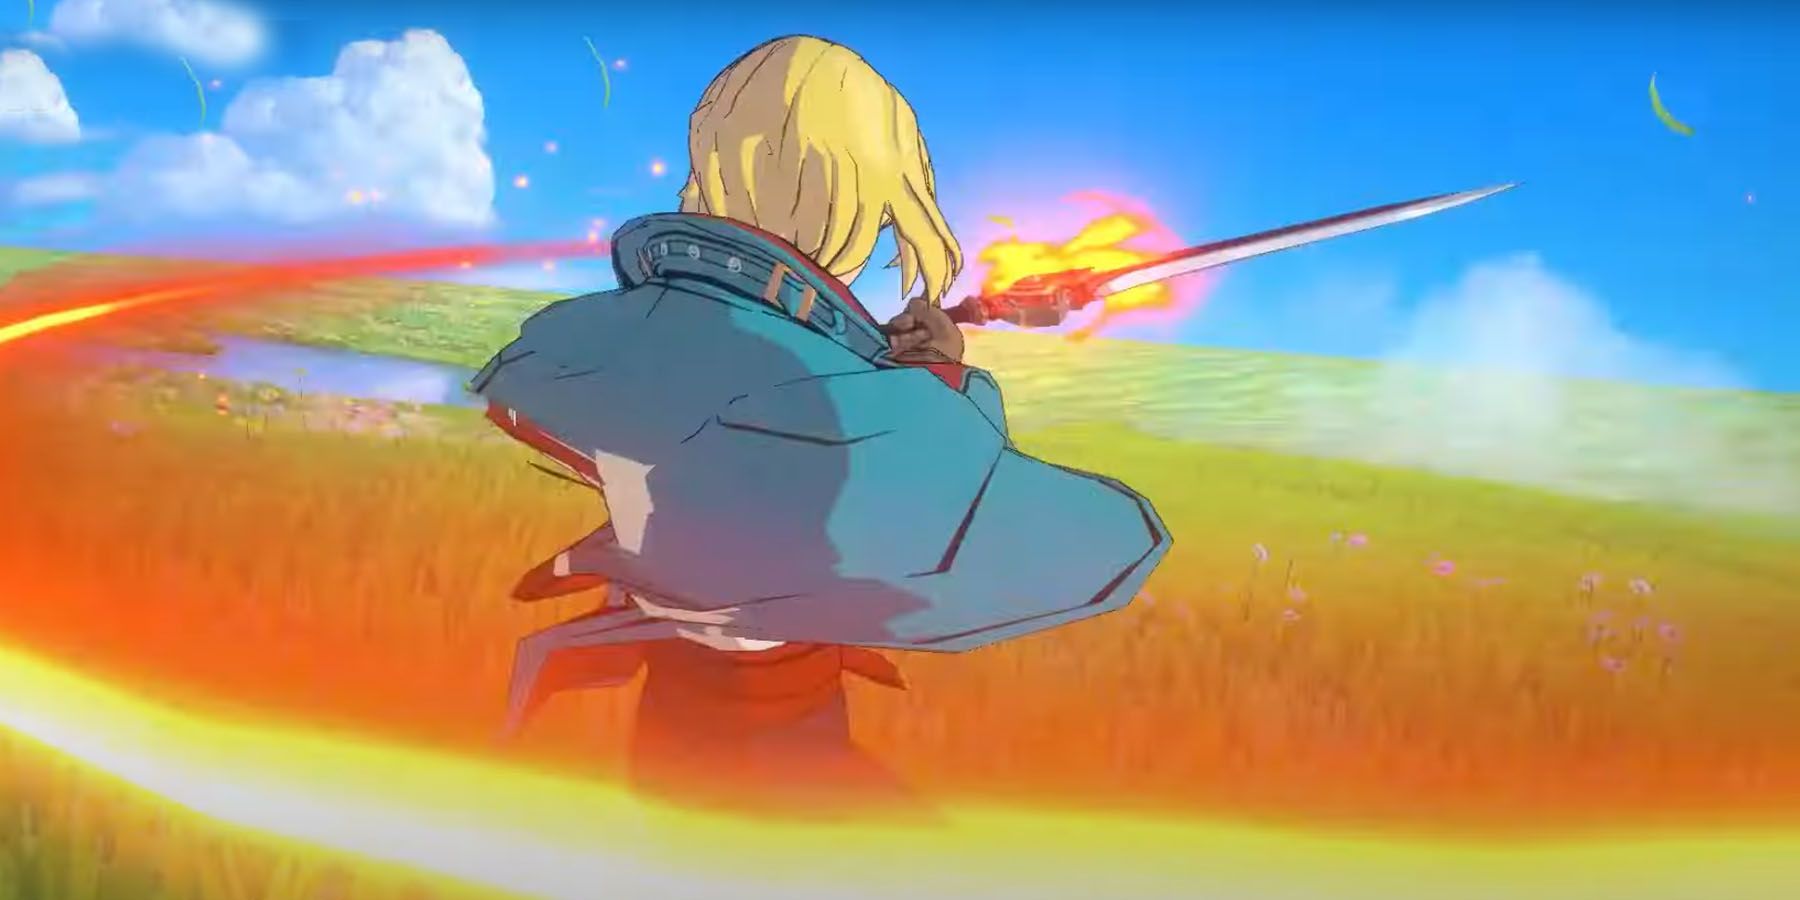 The Swordsman in Ni no Kuni: Cross Worlds using a fire attack